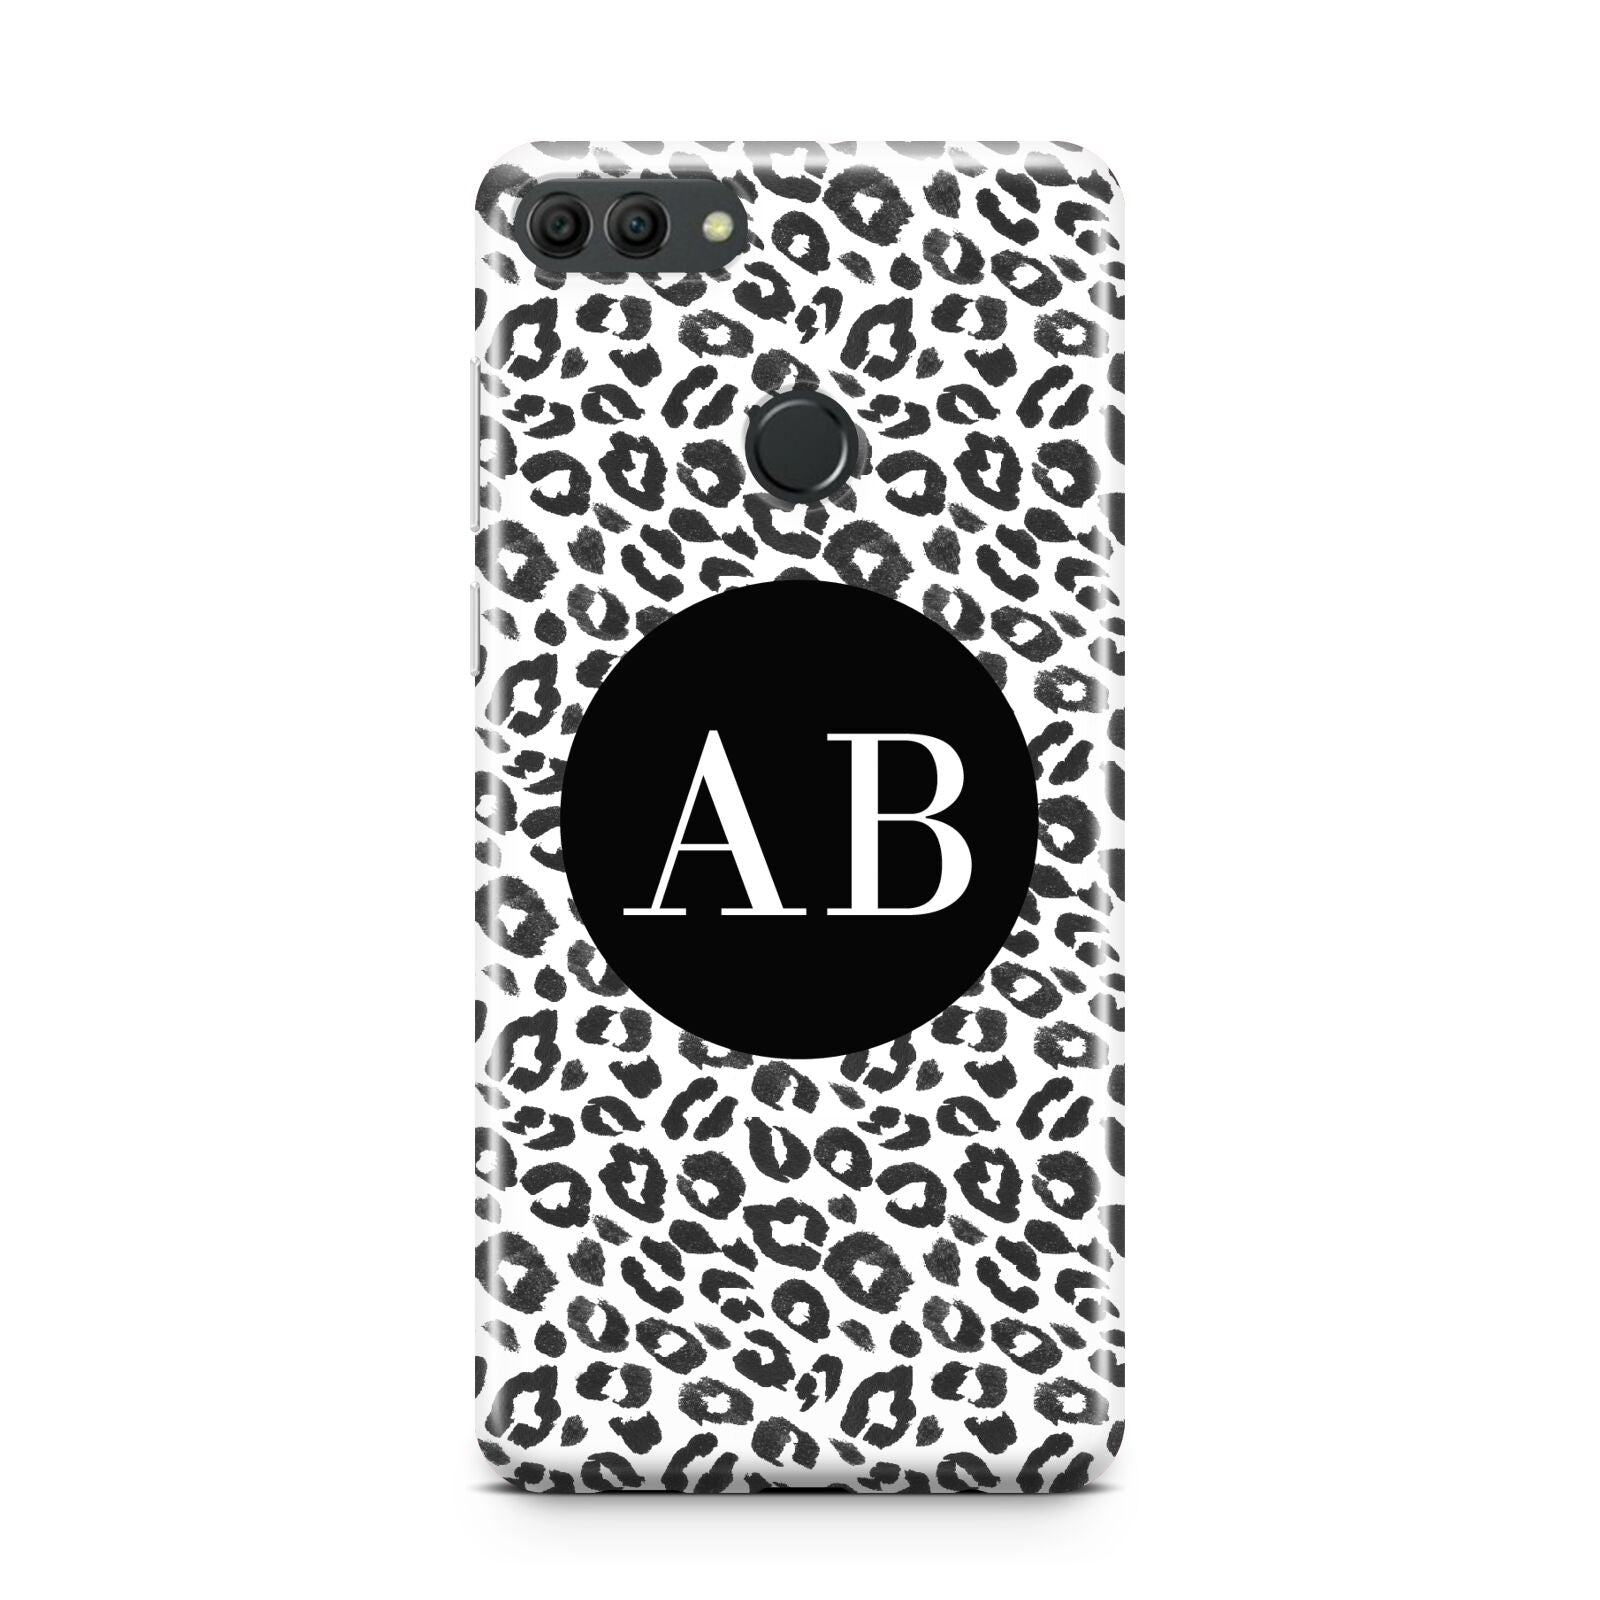 Leopard Print Black and White Huawei Y9 2018